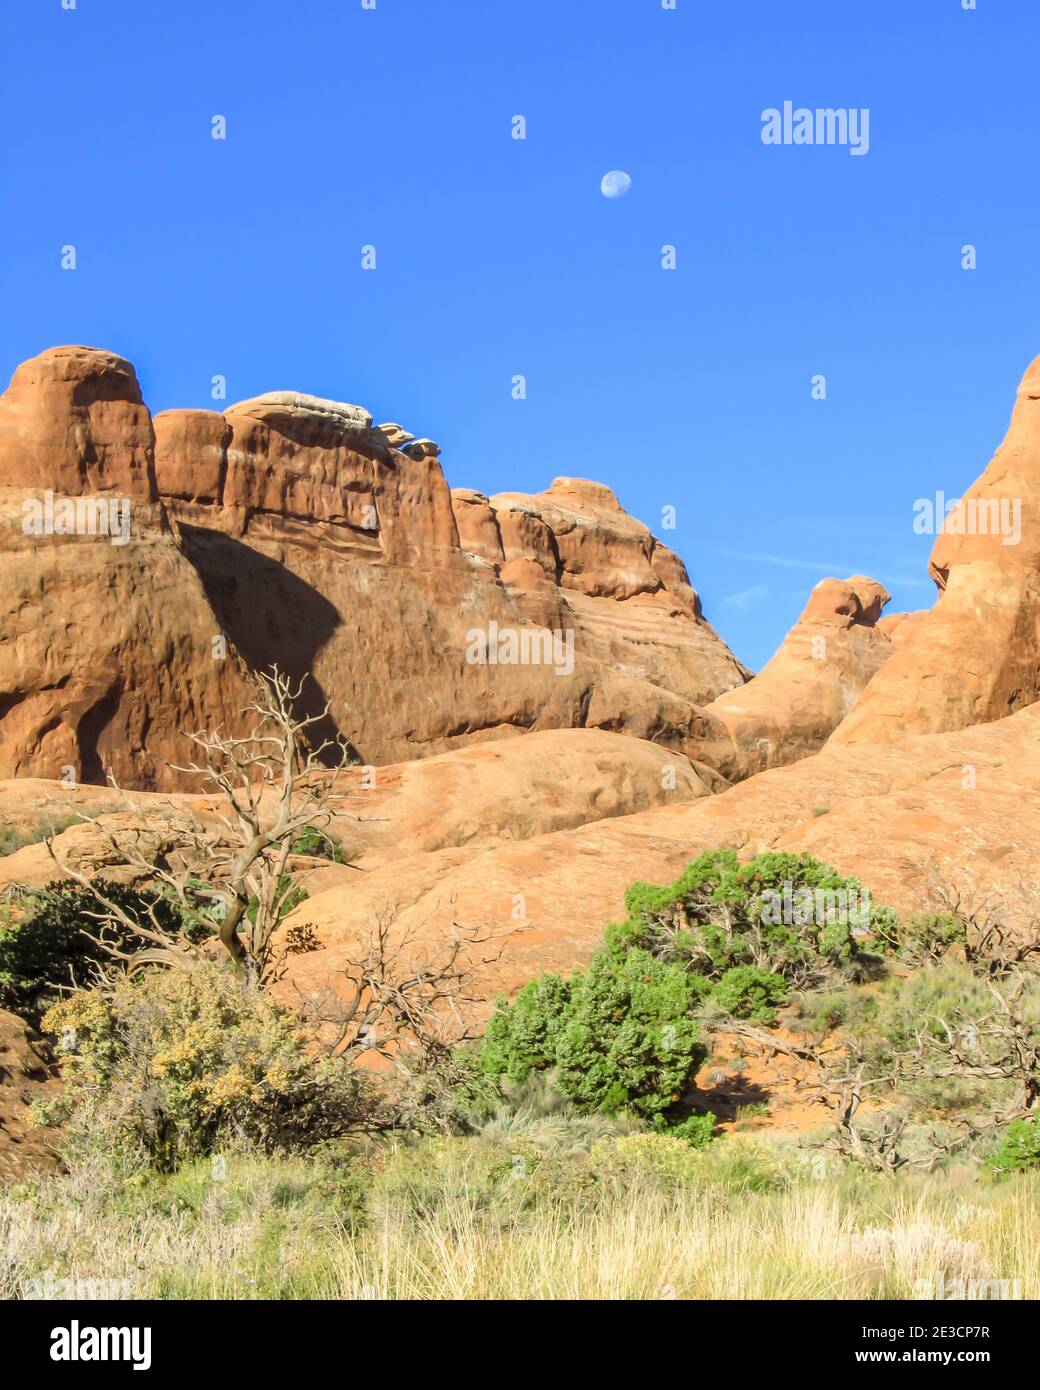 View of the high desert of Archers National Park, Utah, with Juniper-Pinyon Pine woodland with a cliff of Entrada Sandstone in the Background Stock Photo